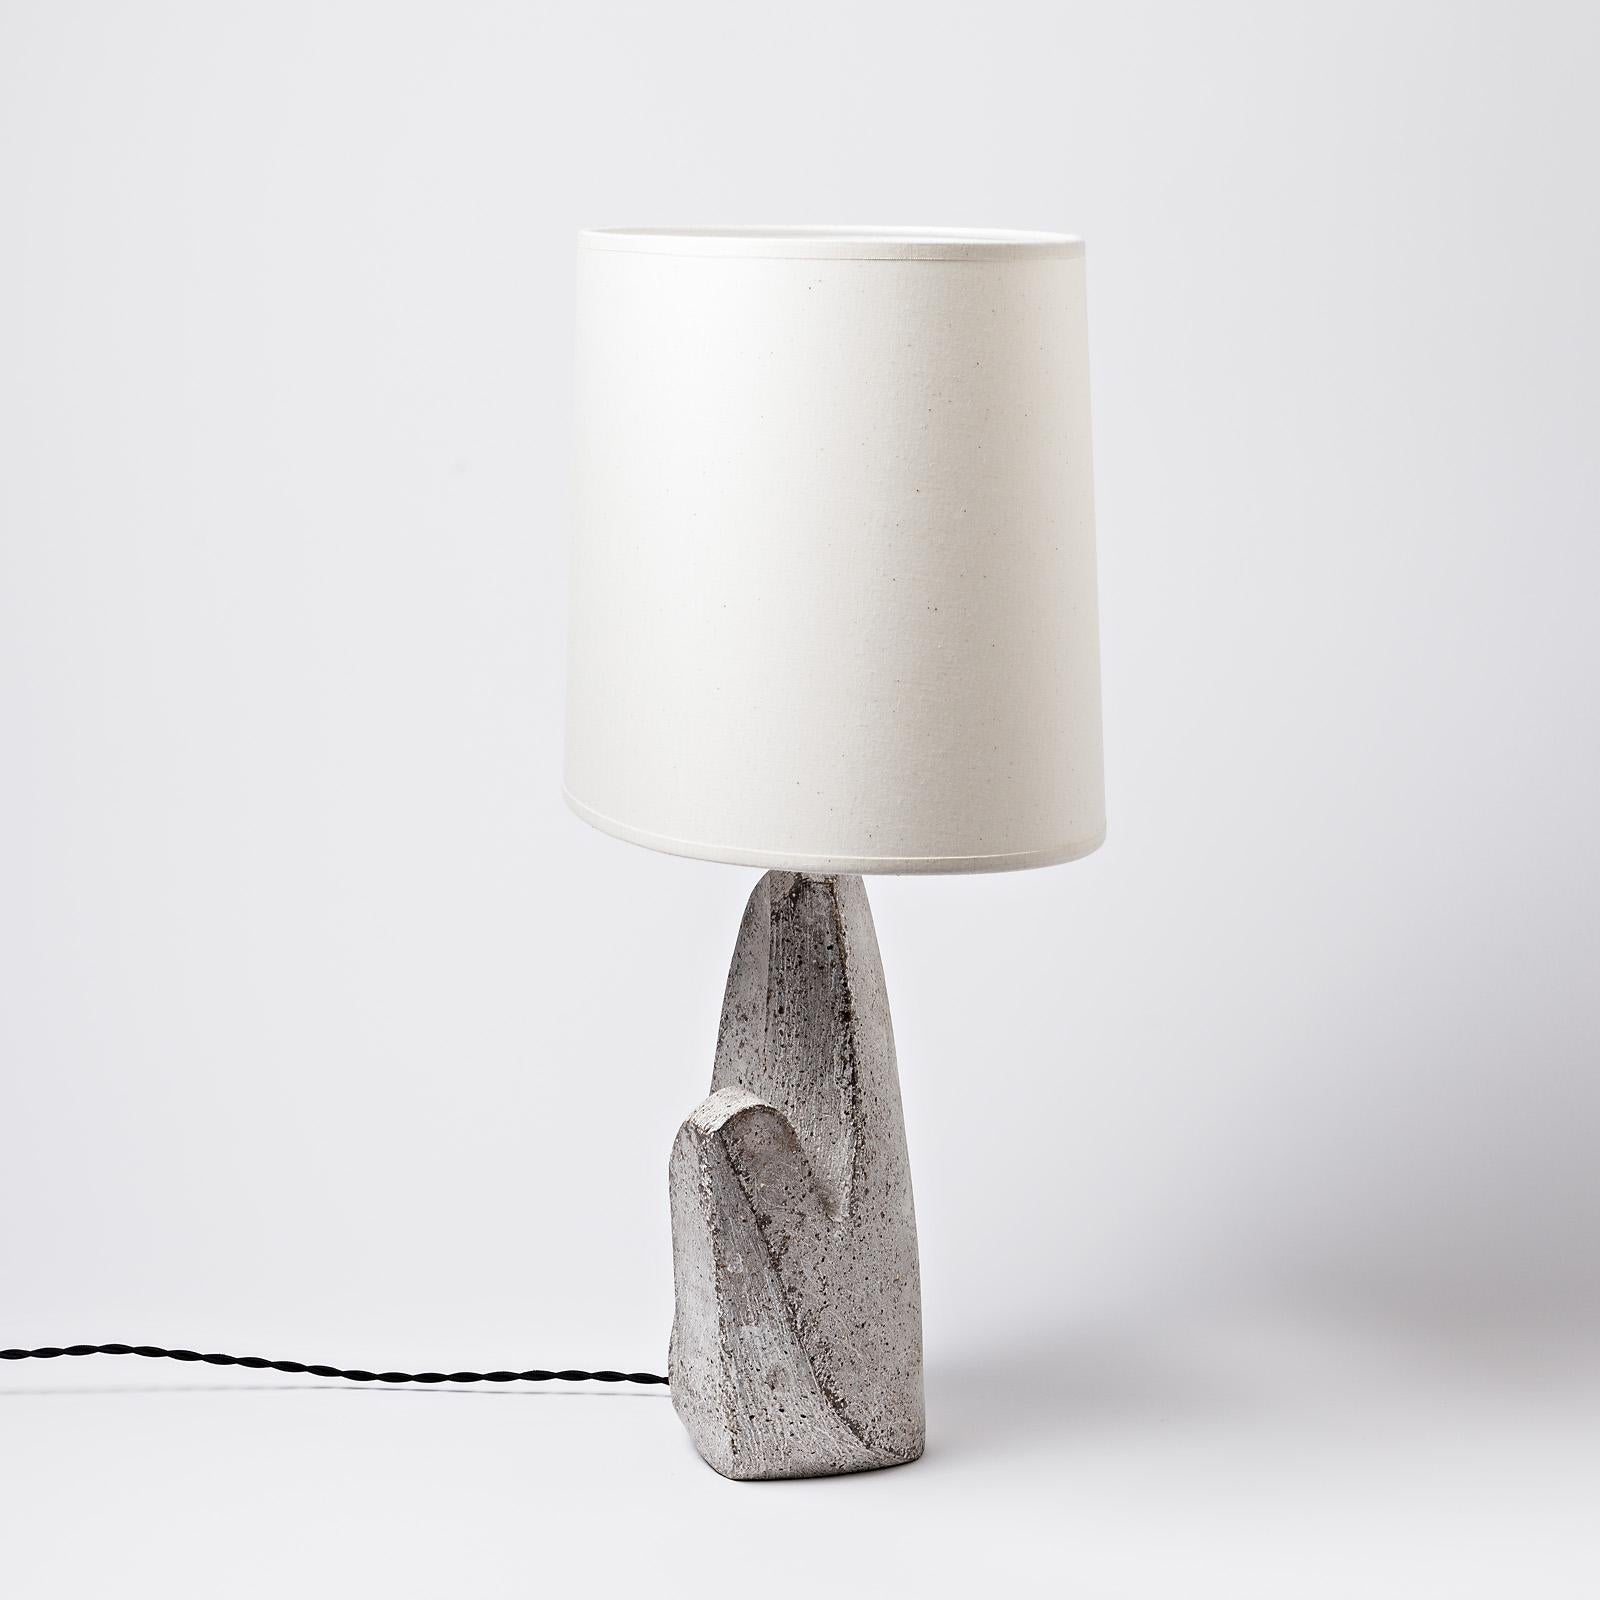 Pair of Ceramic Table Lamps by Maarten Stuer, circa 2021 For Sale 6